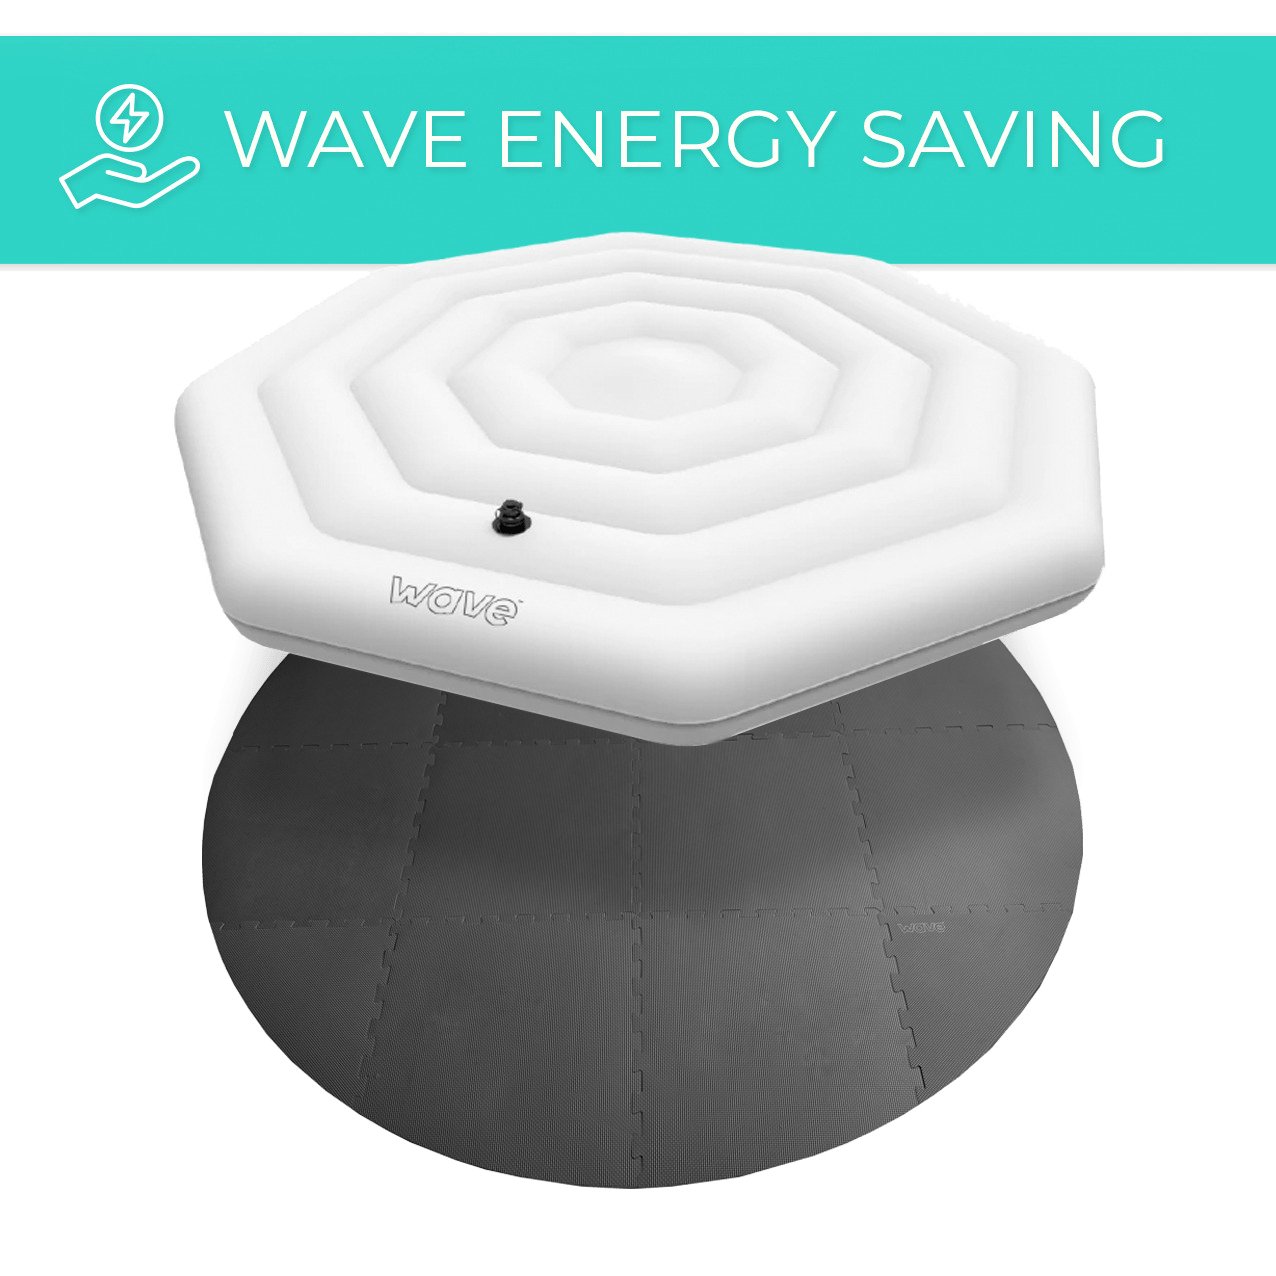 Energy Saving Bundle for Octagon Spa (Round Mat) - Wave Spas Inflatable, foam Hot Tubs